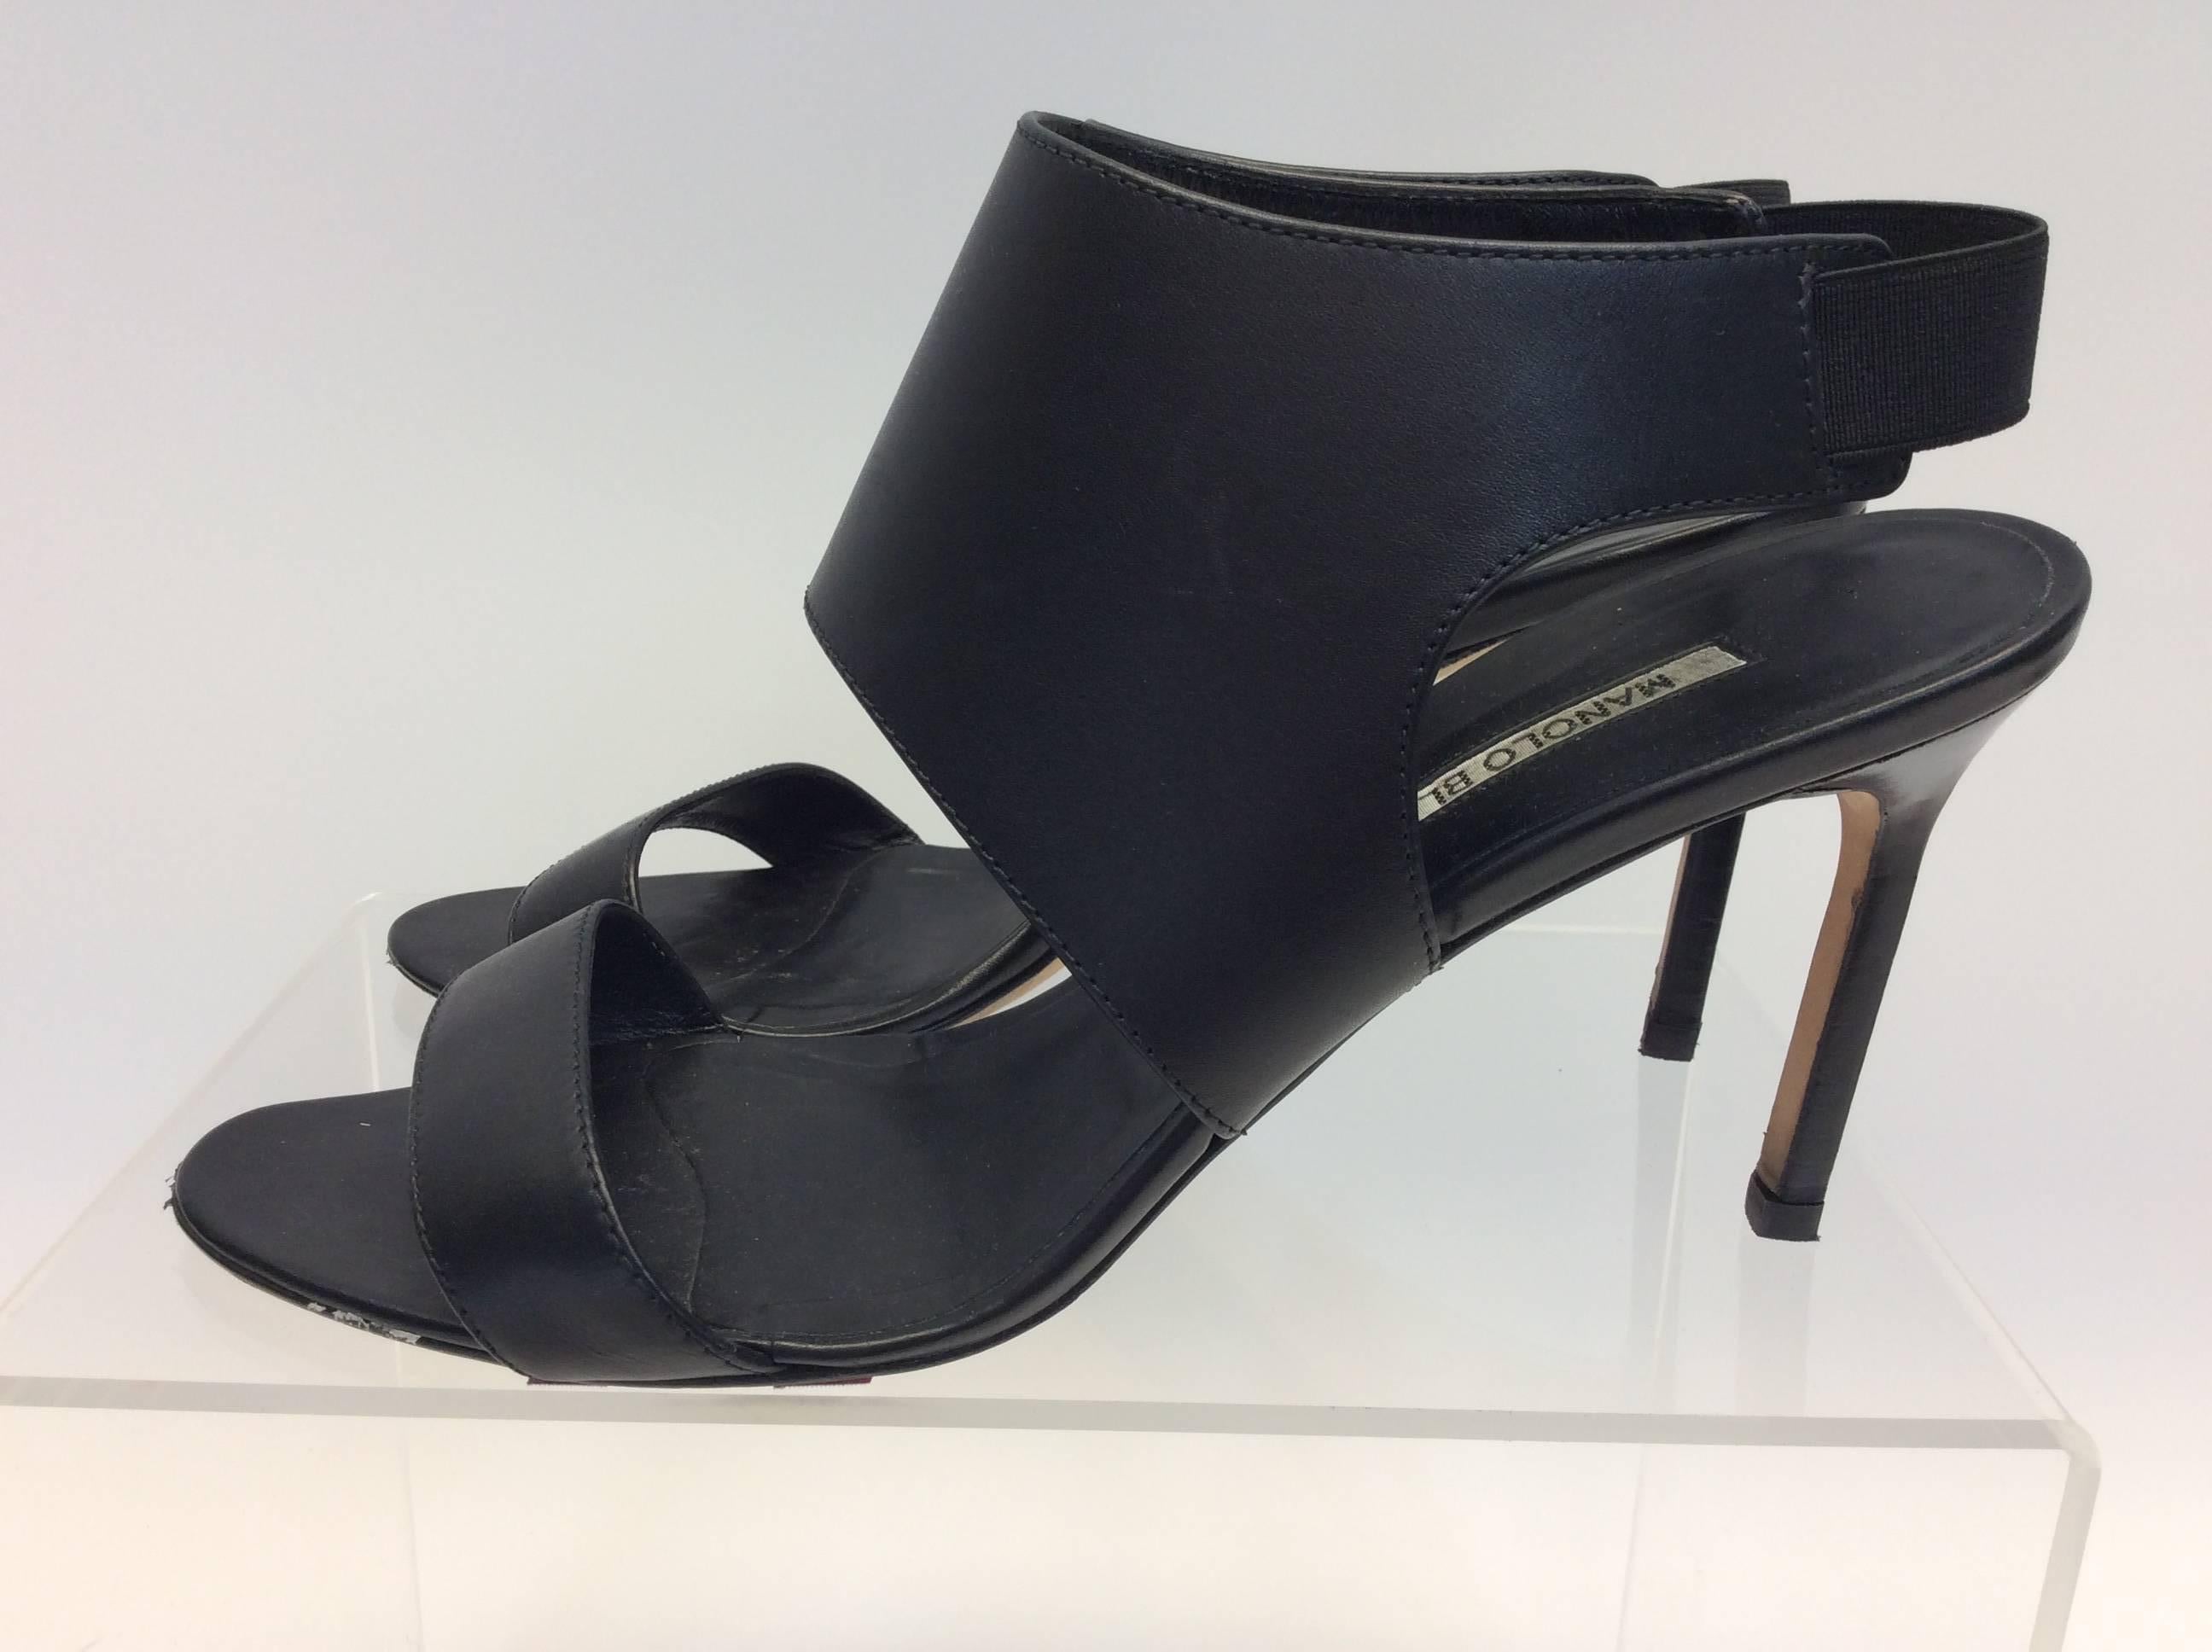 Manolo Blahnik Black Leather Heels
$350
Made in Italy
Size 39.5
3.5